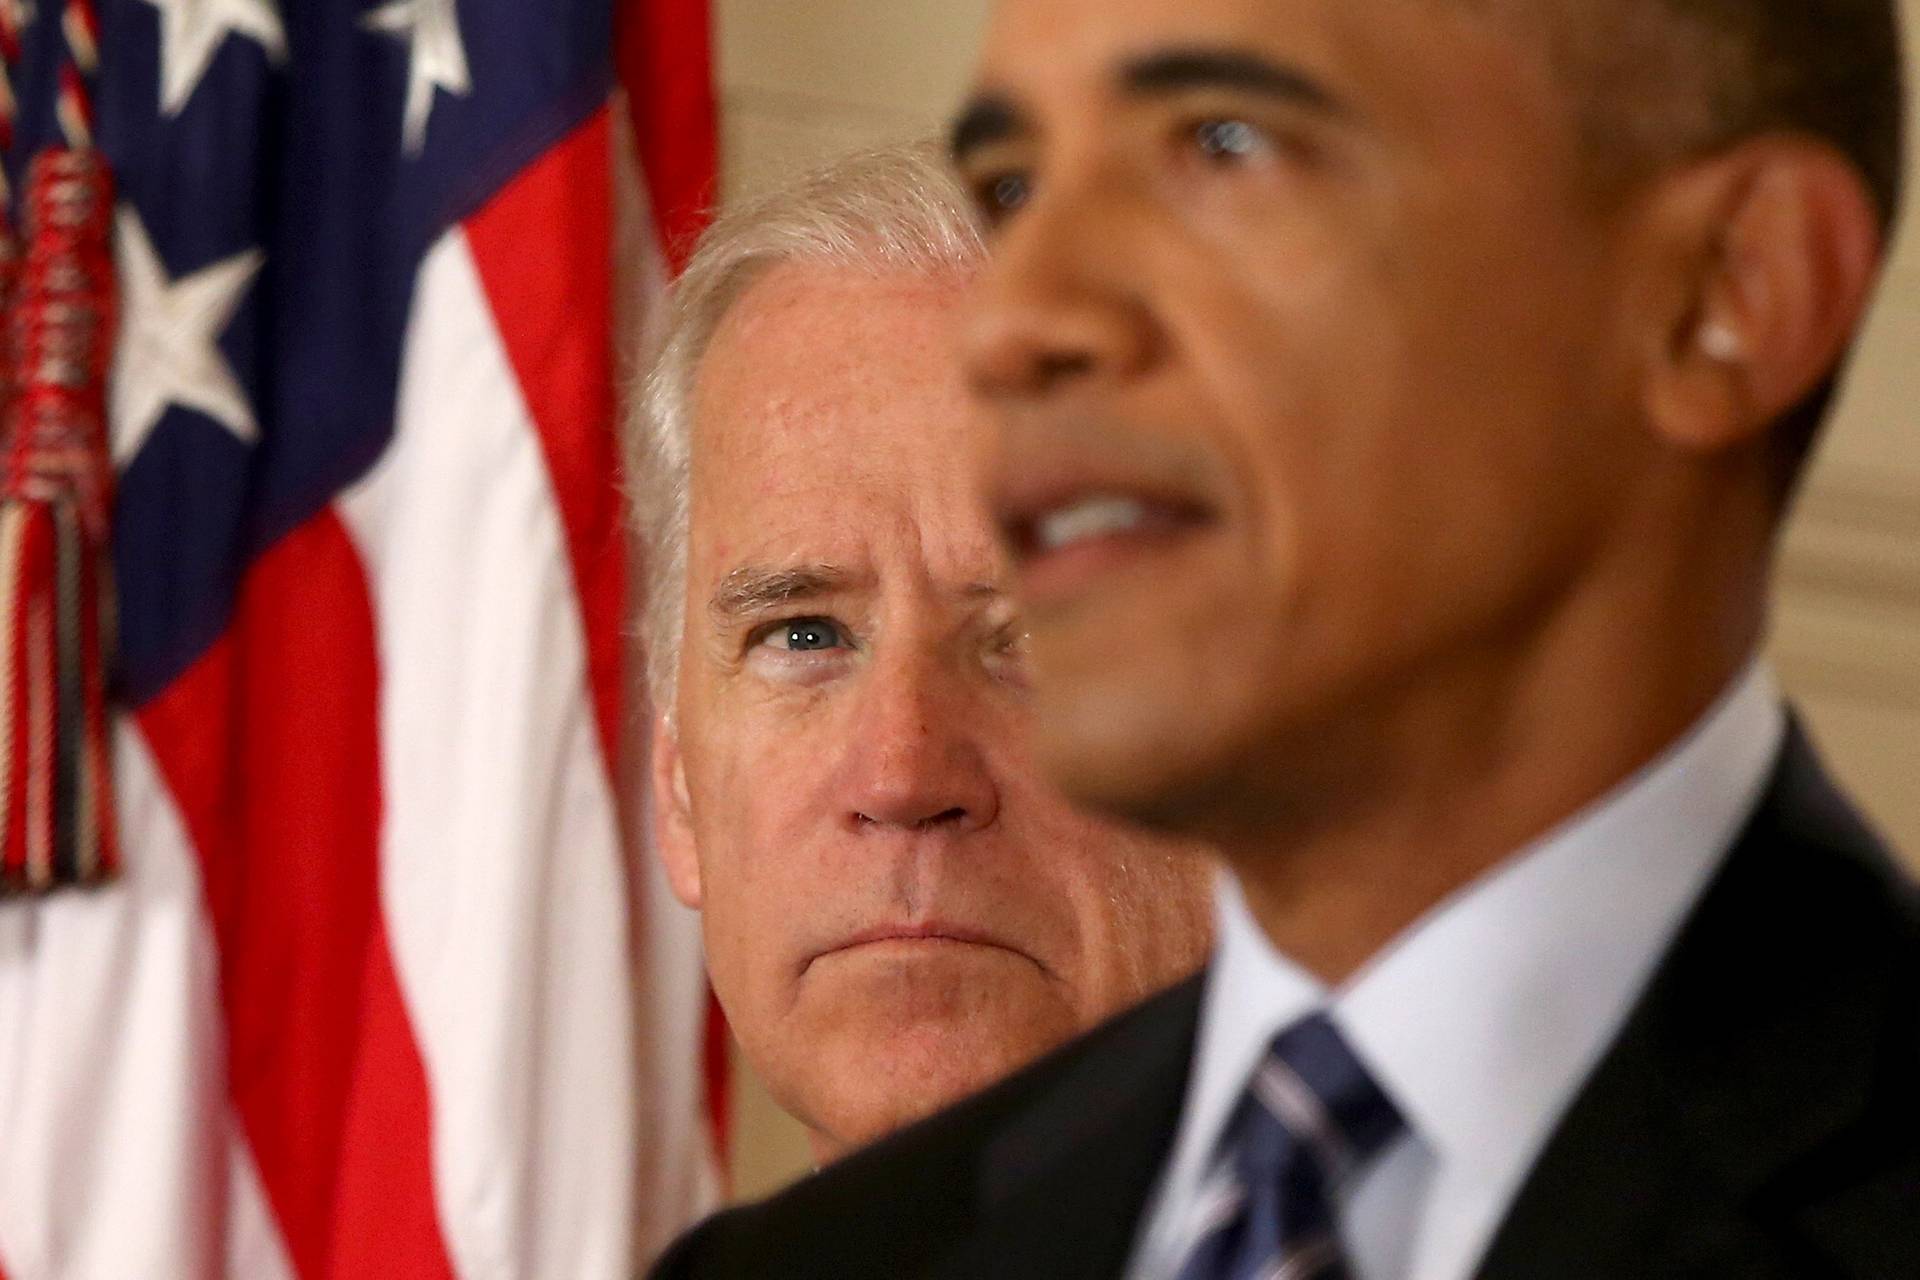 President Barack Obama, standing with Vice President Joe Biden, conducts a press conference in the East Room of the White House about the Iran nuclear deal, on July 14, 2015